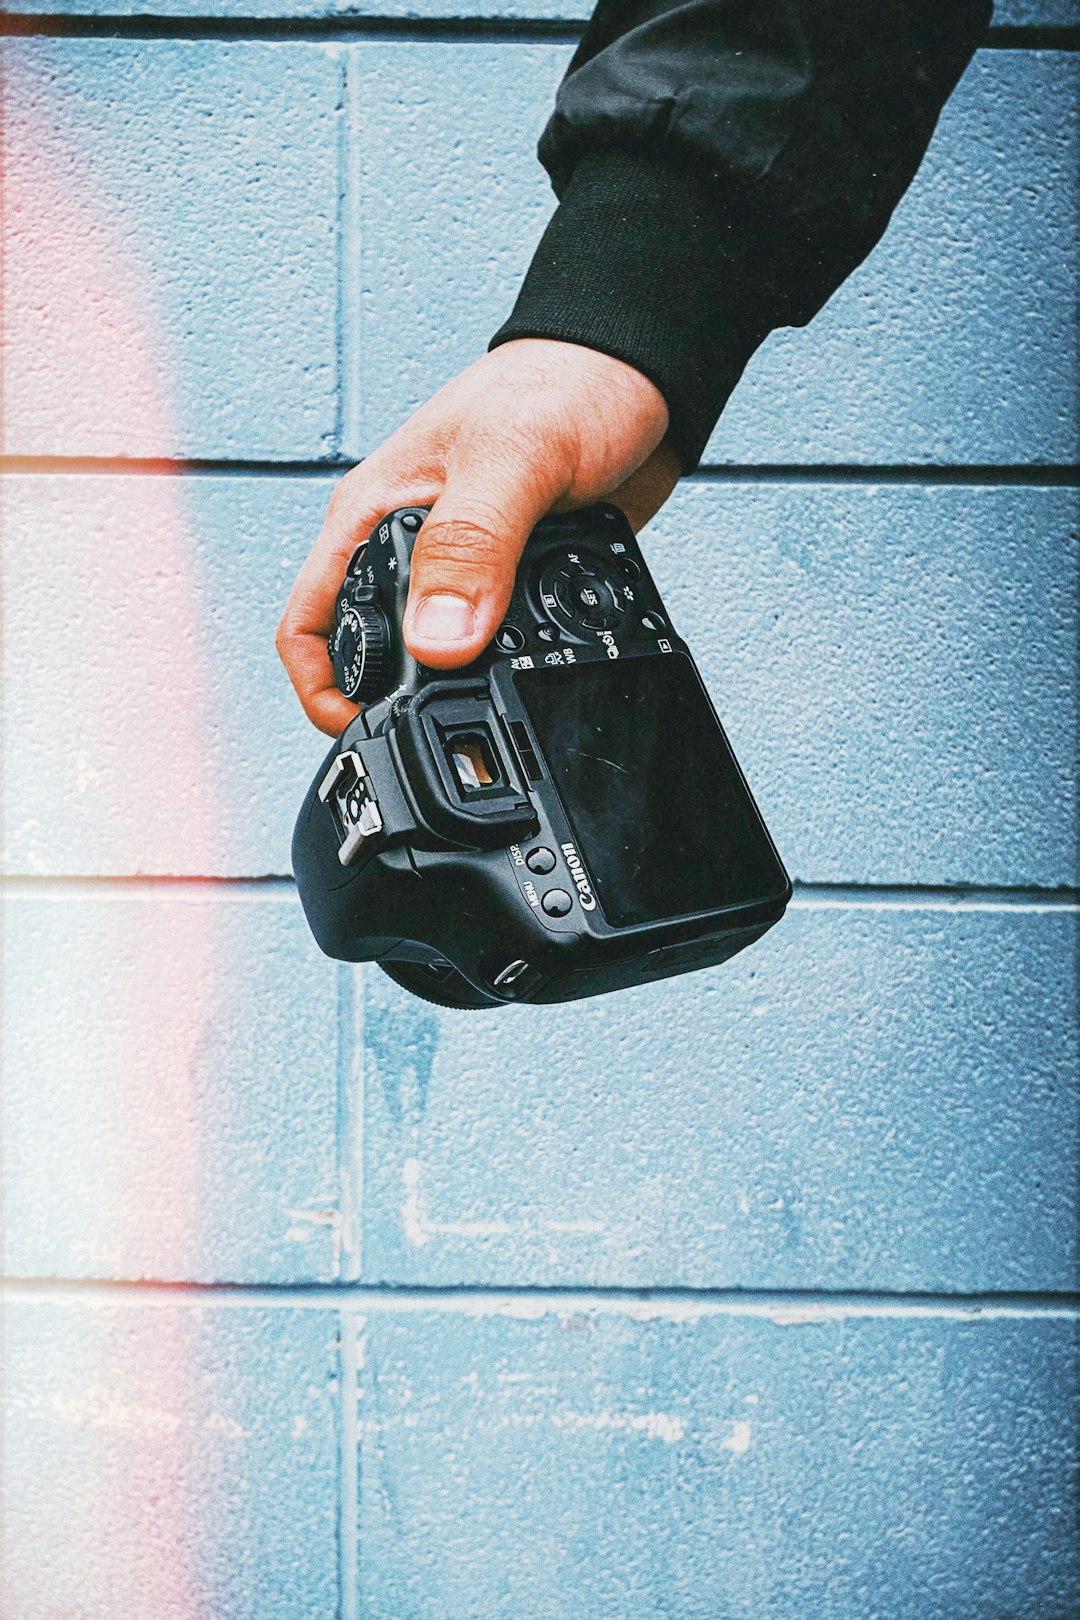 person holding black electronic device